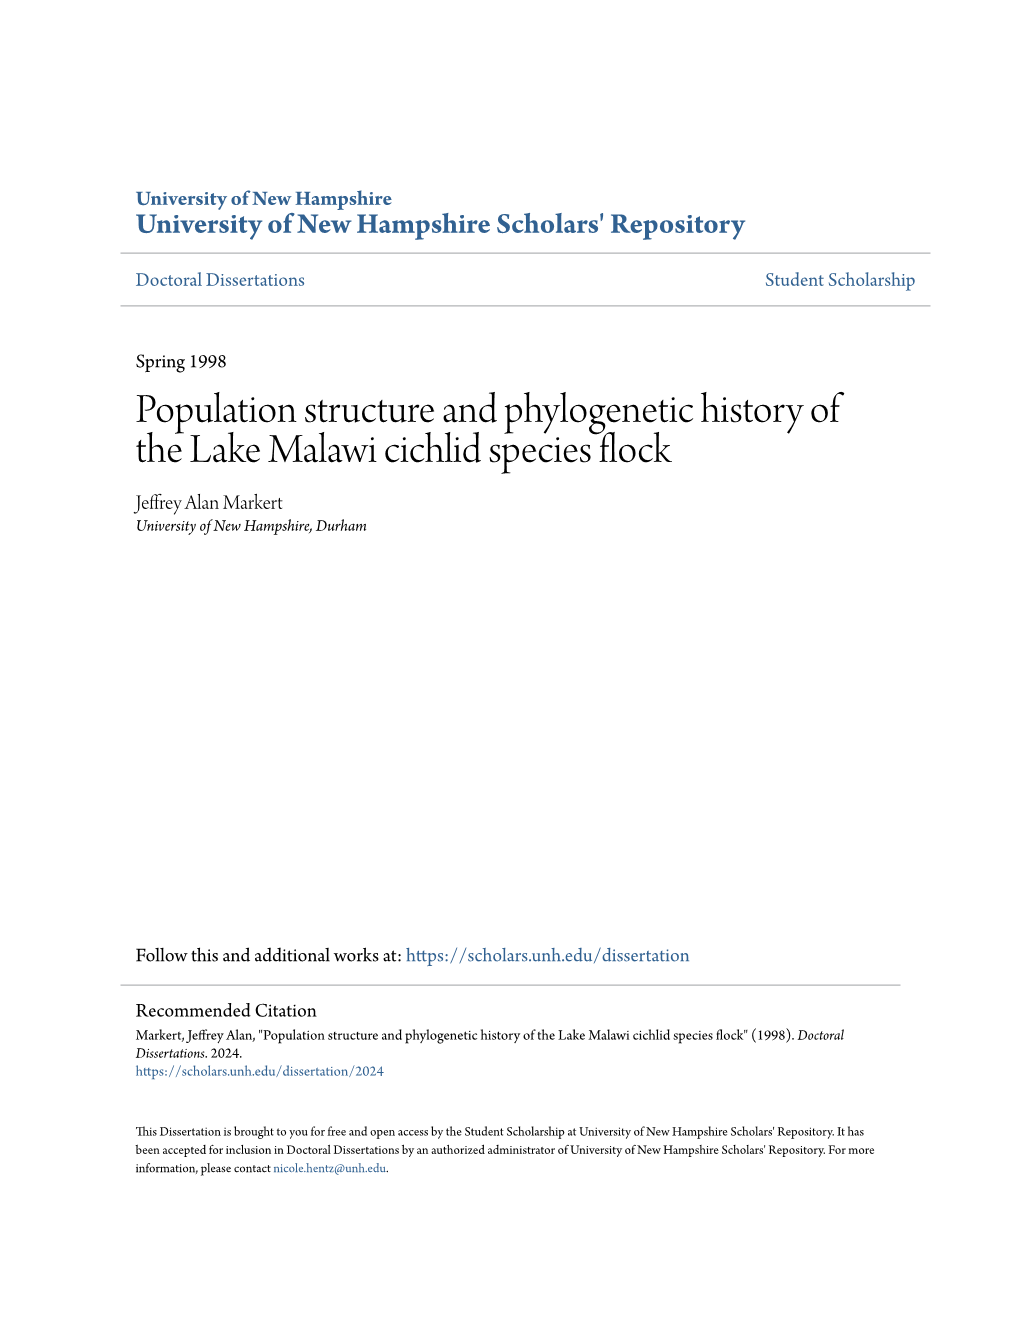 Population Structure and Phylogenetic History of the Lake Malawi Cichlid Species Flock Jeffrey Alan Markert University of New Hampshire, Durham